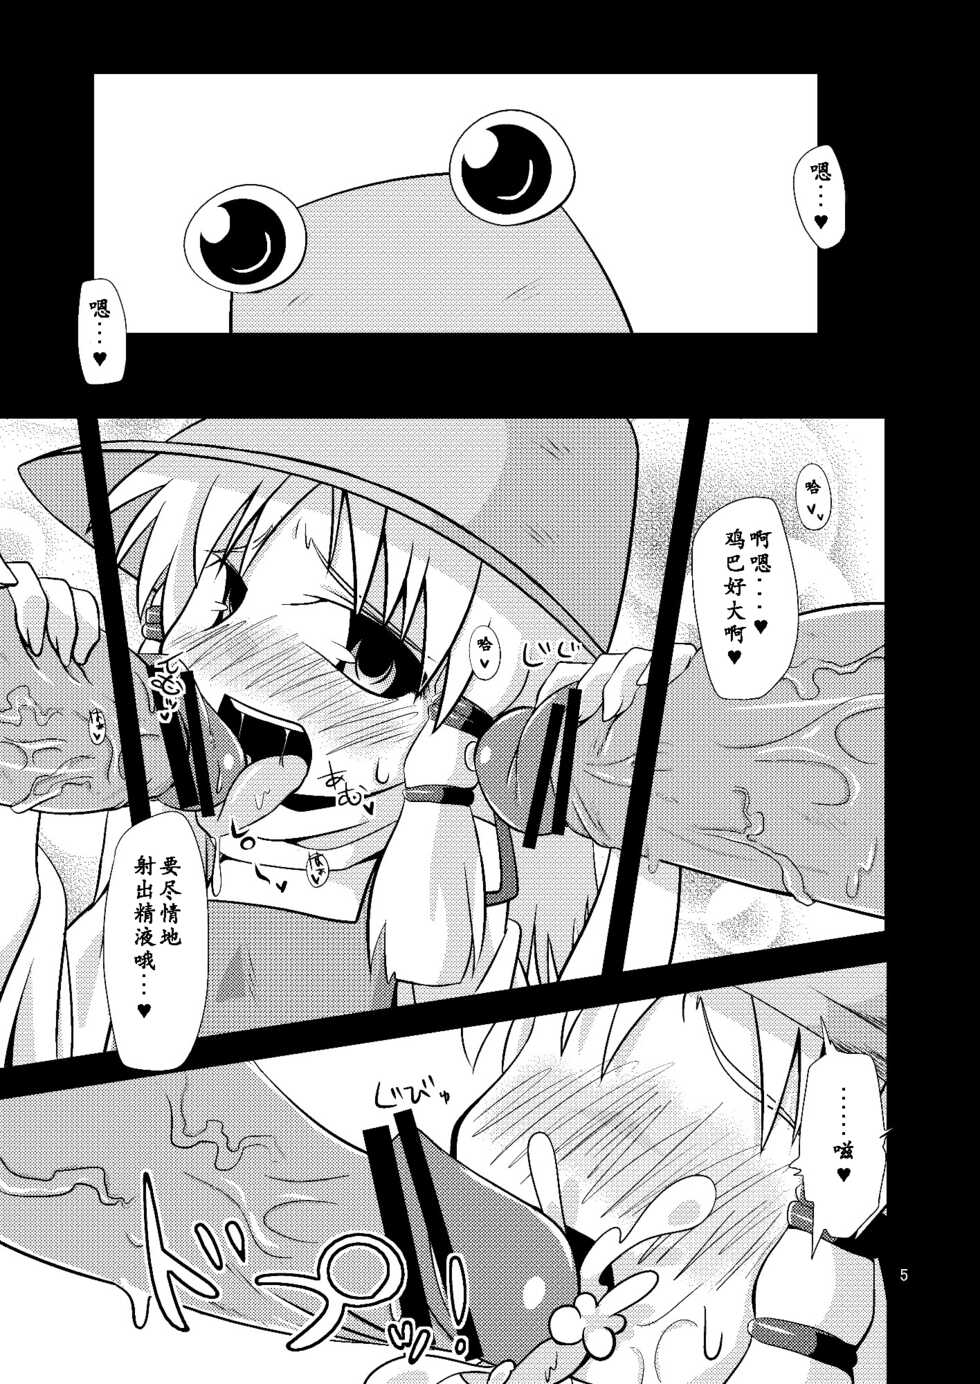 (Reitaisai 7) [Happiness Milk (Obyaa)] Nikuyokugami Gyoushin - Carnal desires in God - (Touhou Project) [Chinese] [Augusto个人汉化] - Page 3